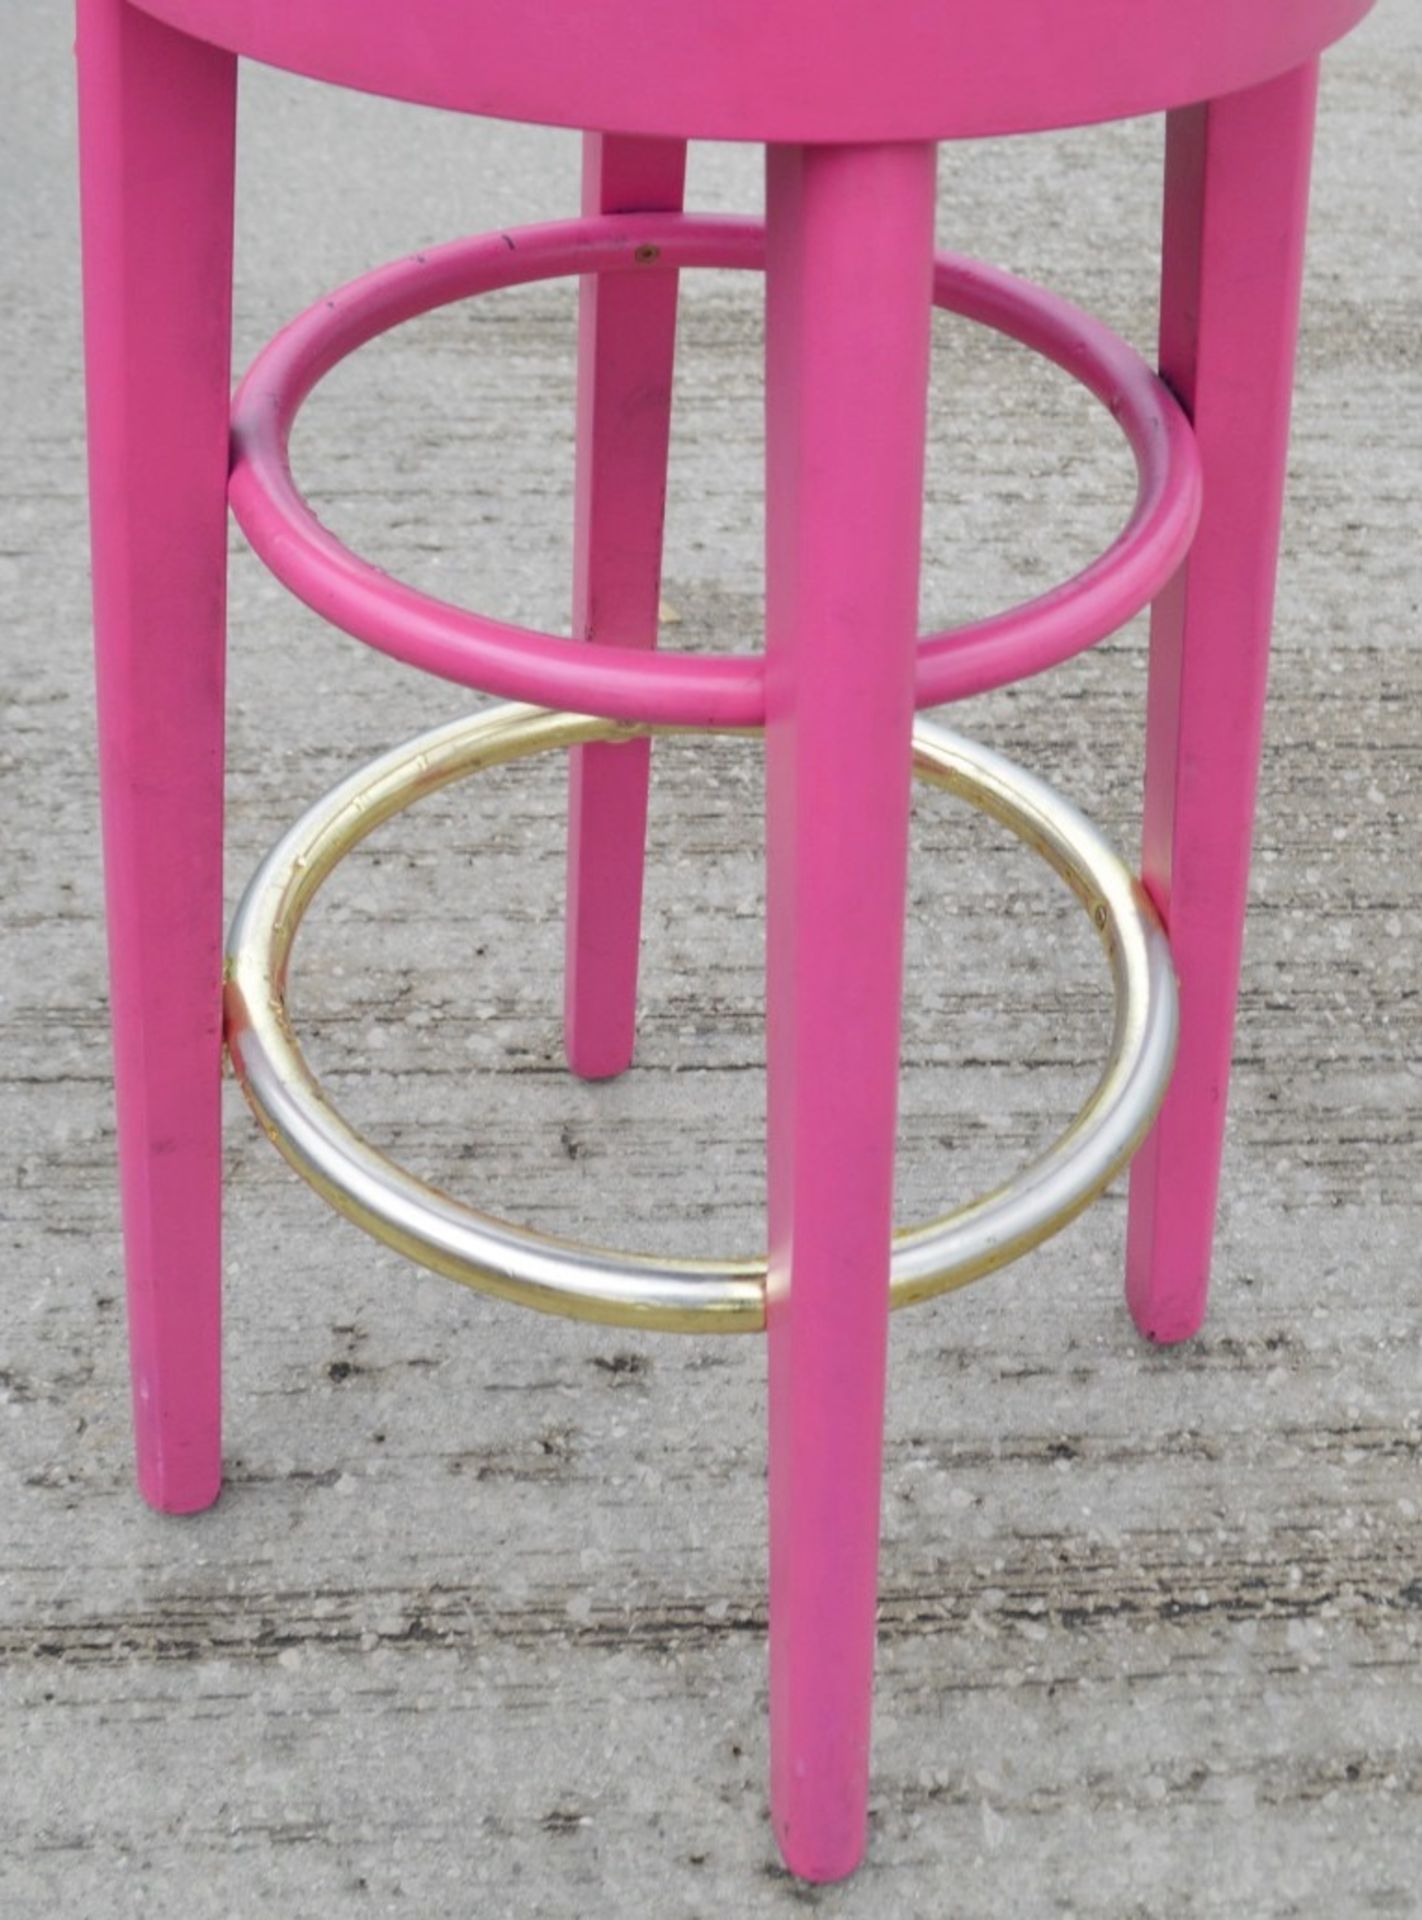 4 x Commercial Bar Stools Featuring Upholstered Seats And A Hot Pink Finish - Image 2 of 3